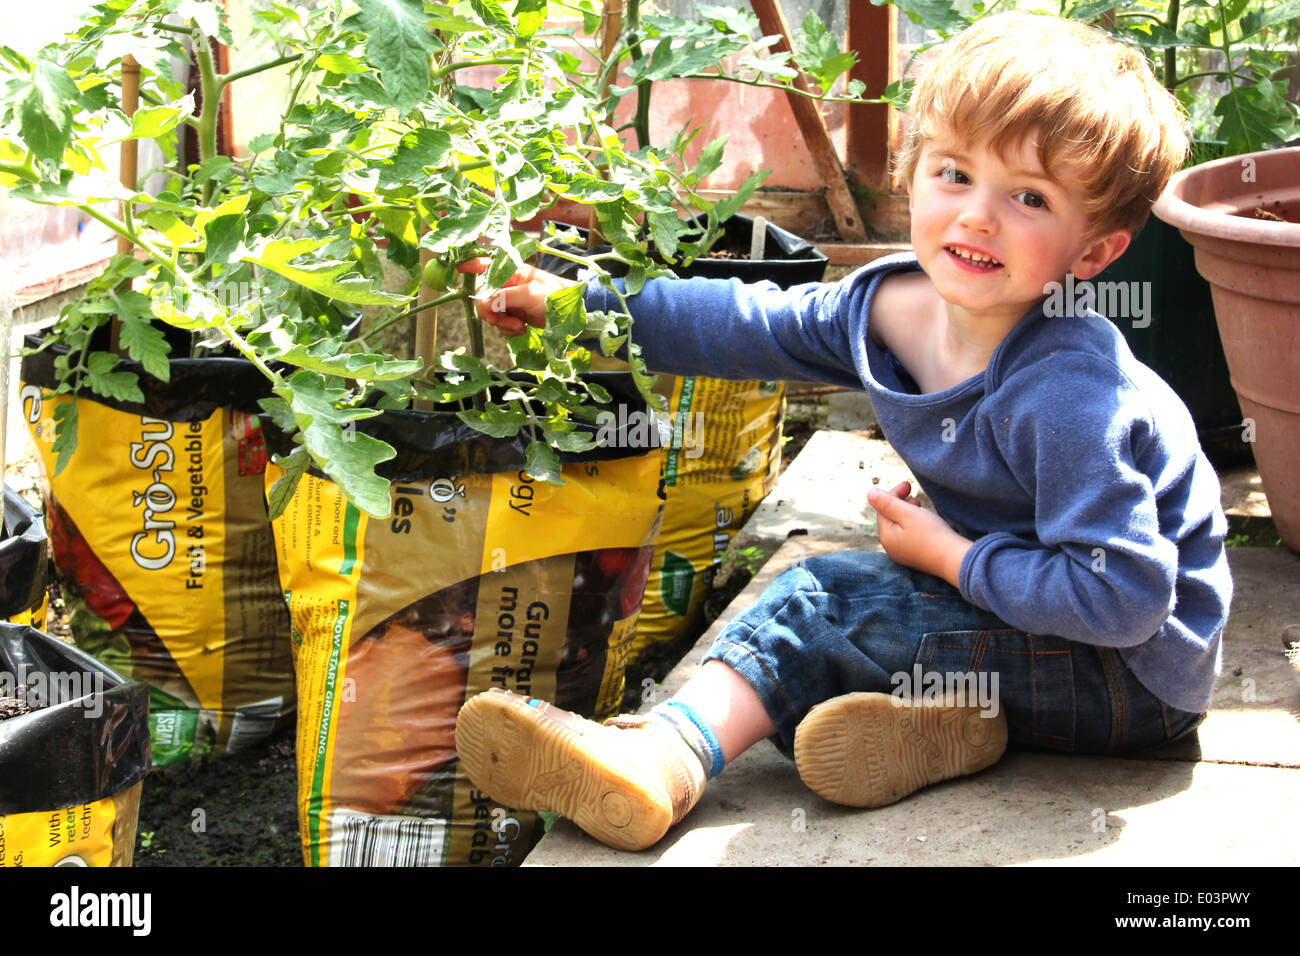 A cheeky smiling small boy inspecting/about to pick green tomatoes (4 of a series of 5) Stock Photo